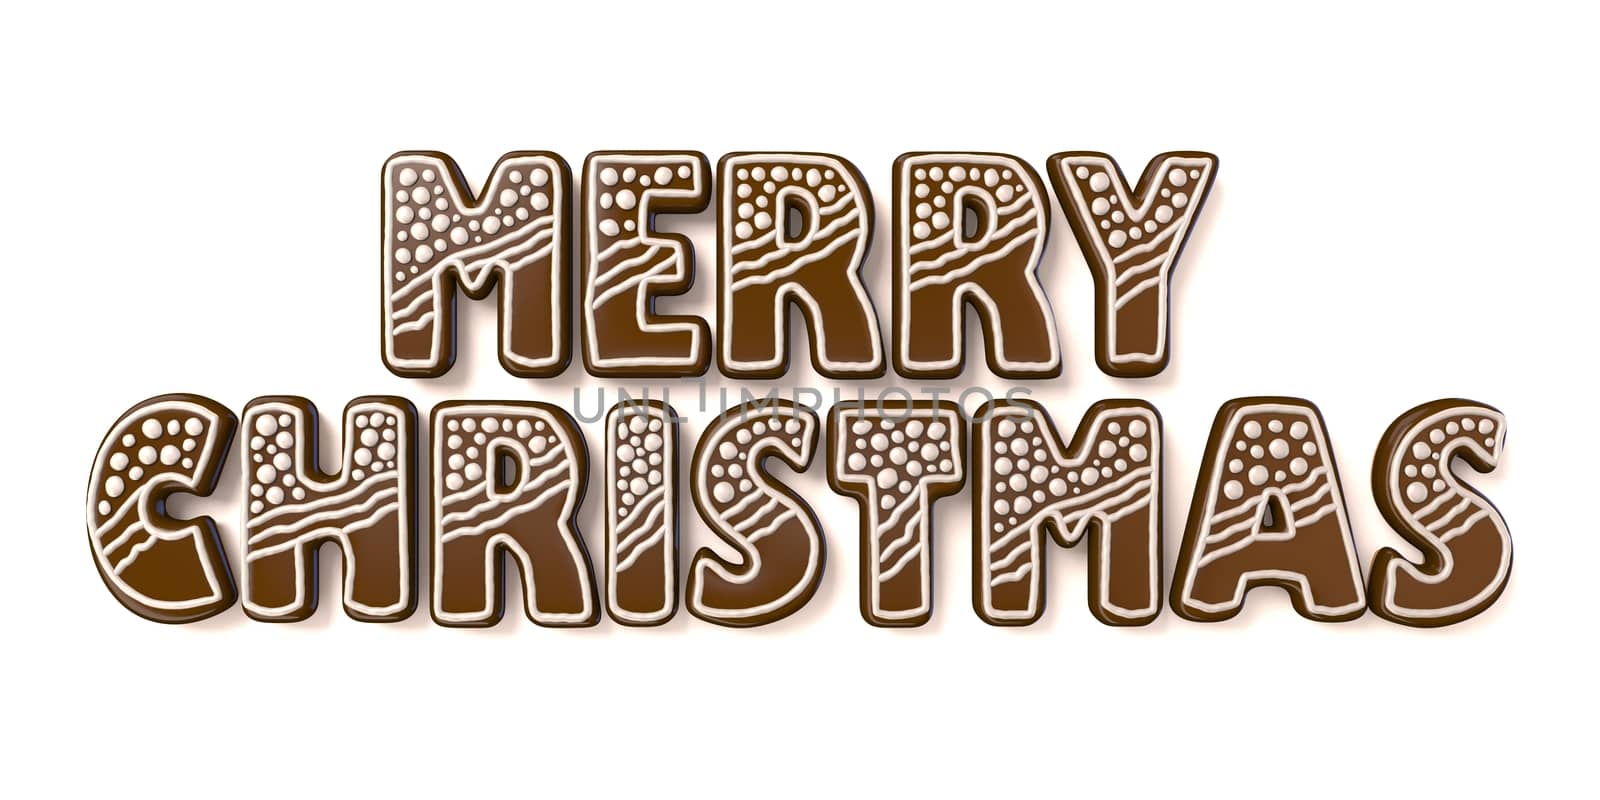 Merry Christmas gingerbread sign. 3D render illustration isolated on white background